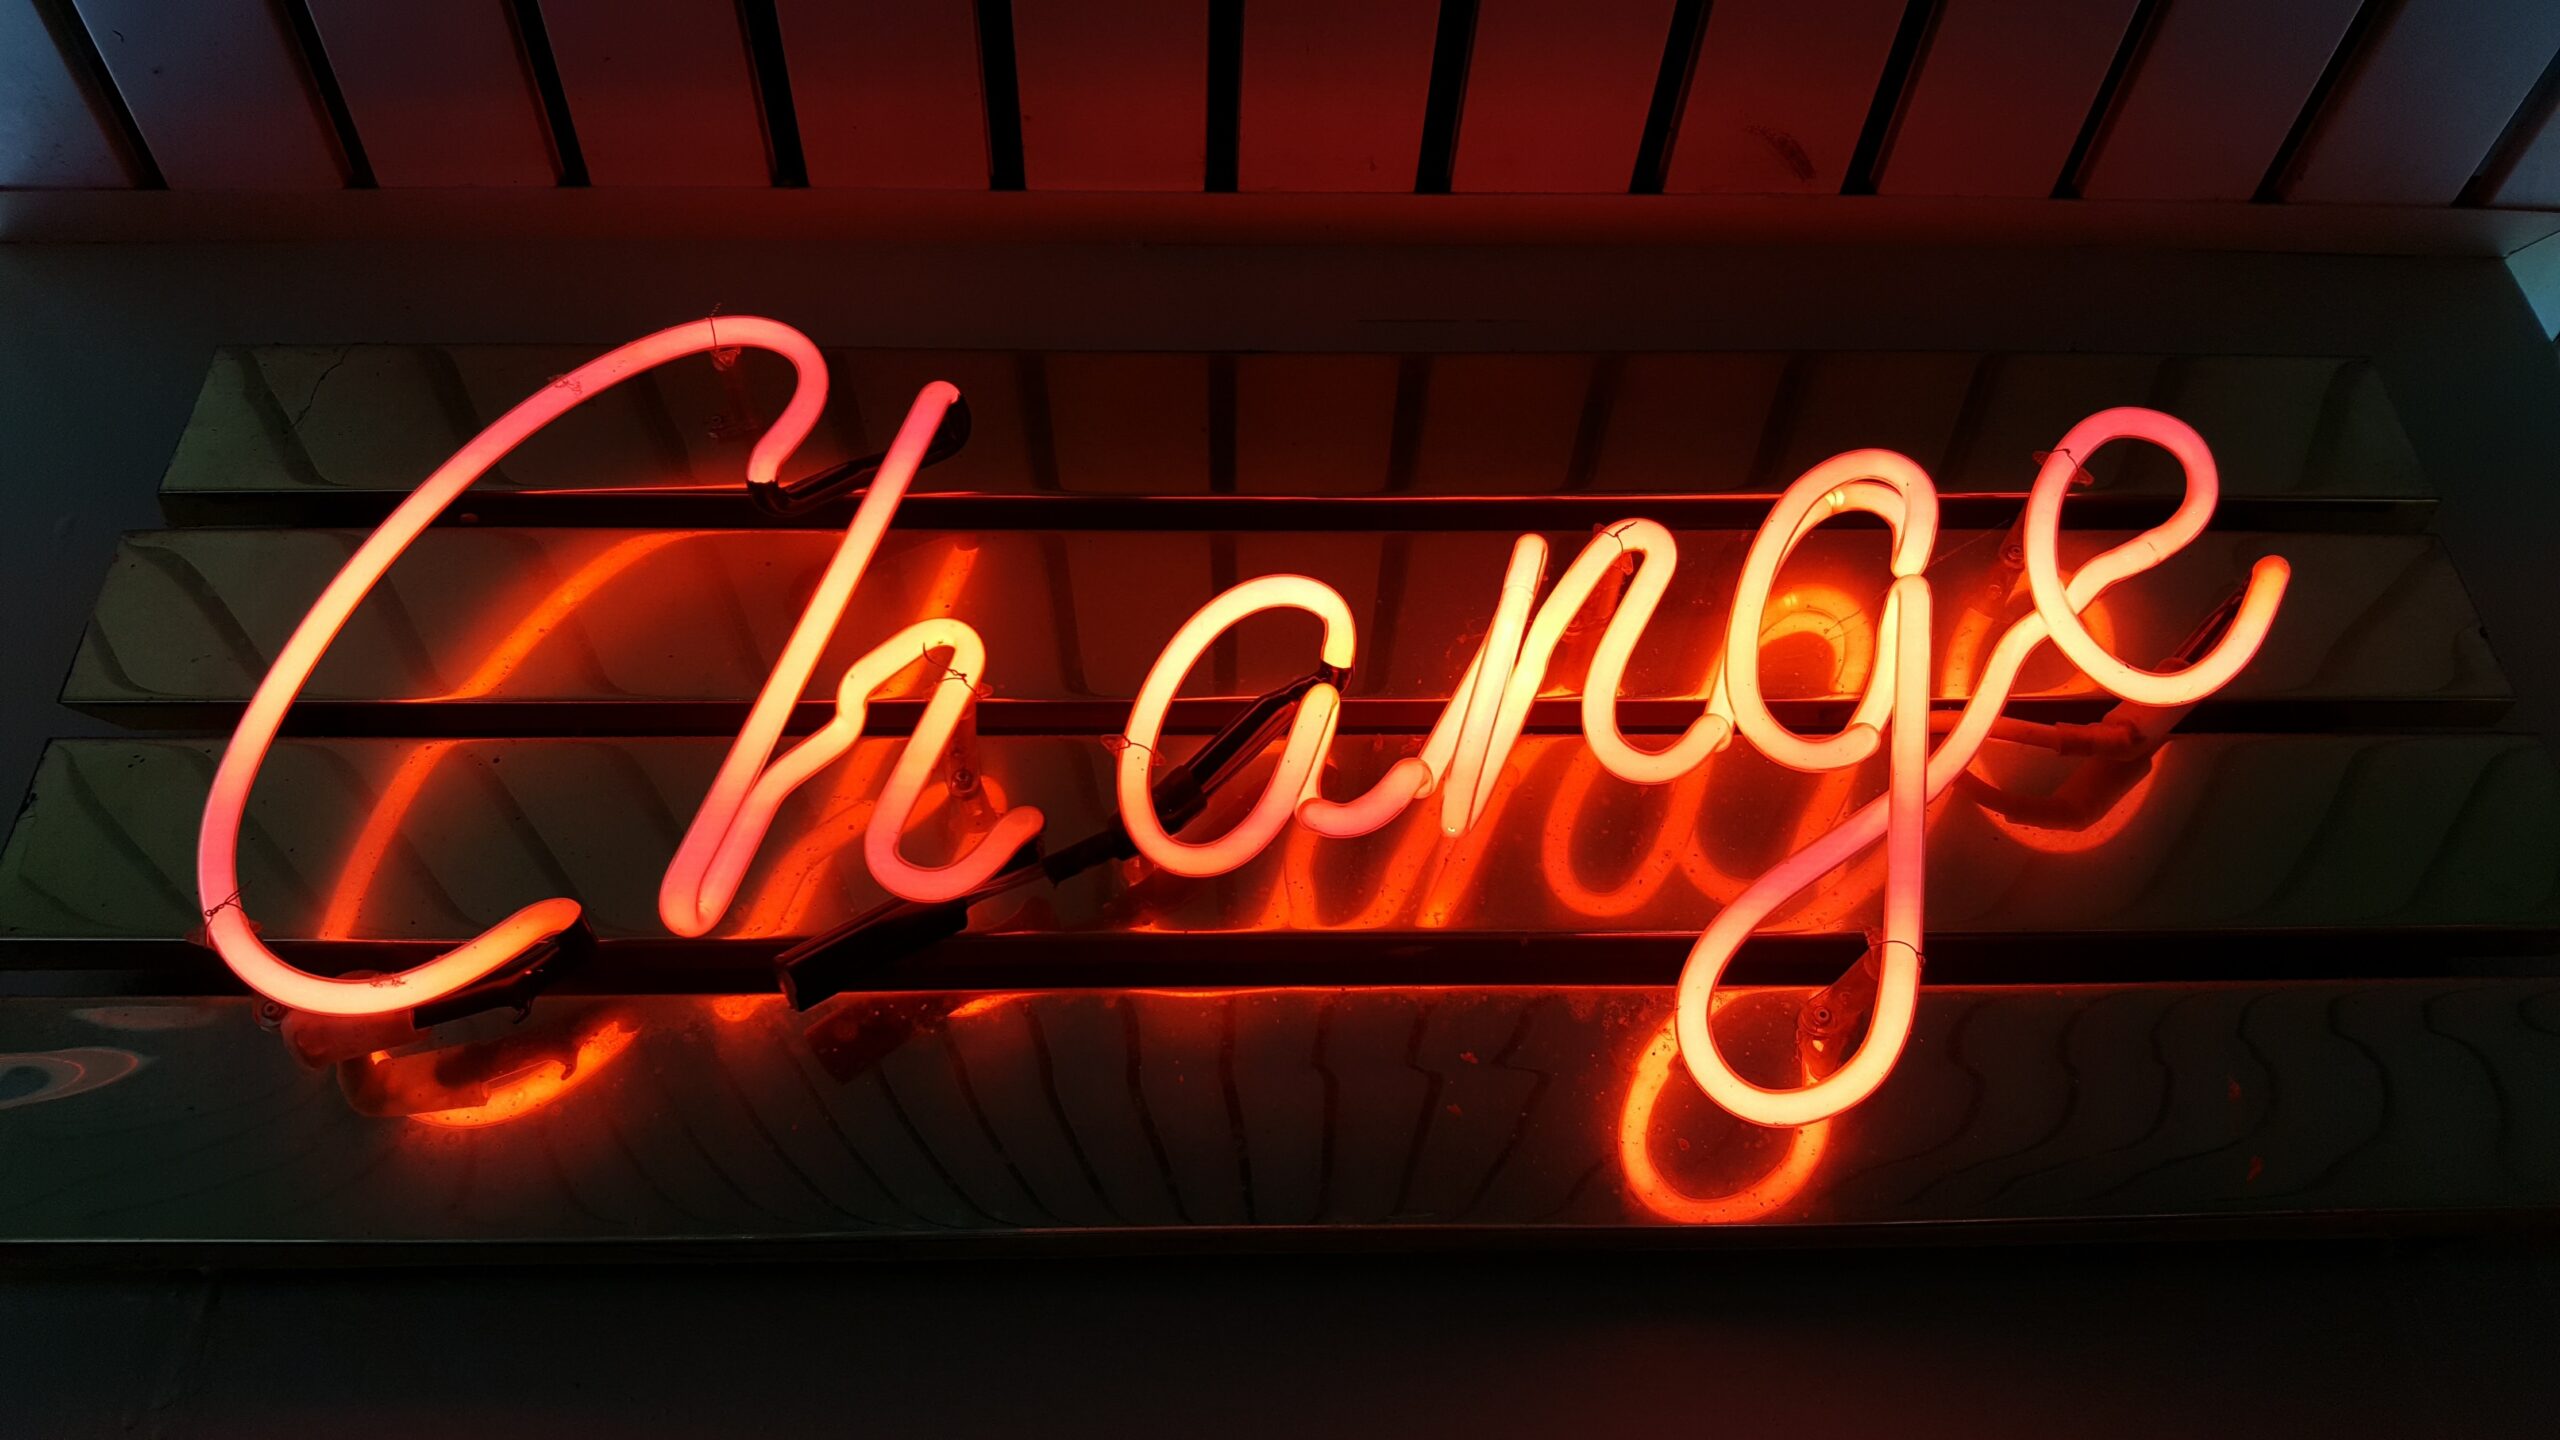 Change Involves Loss but Can Lead to Great Rewards – by Guest Blogger Mary Tebeau